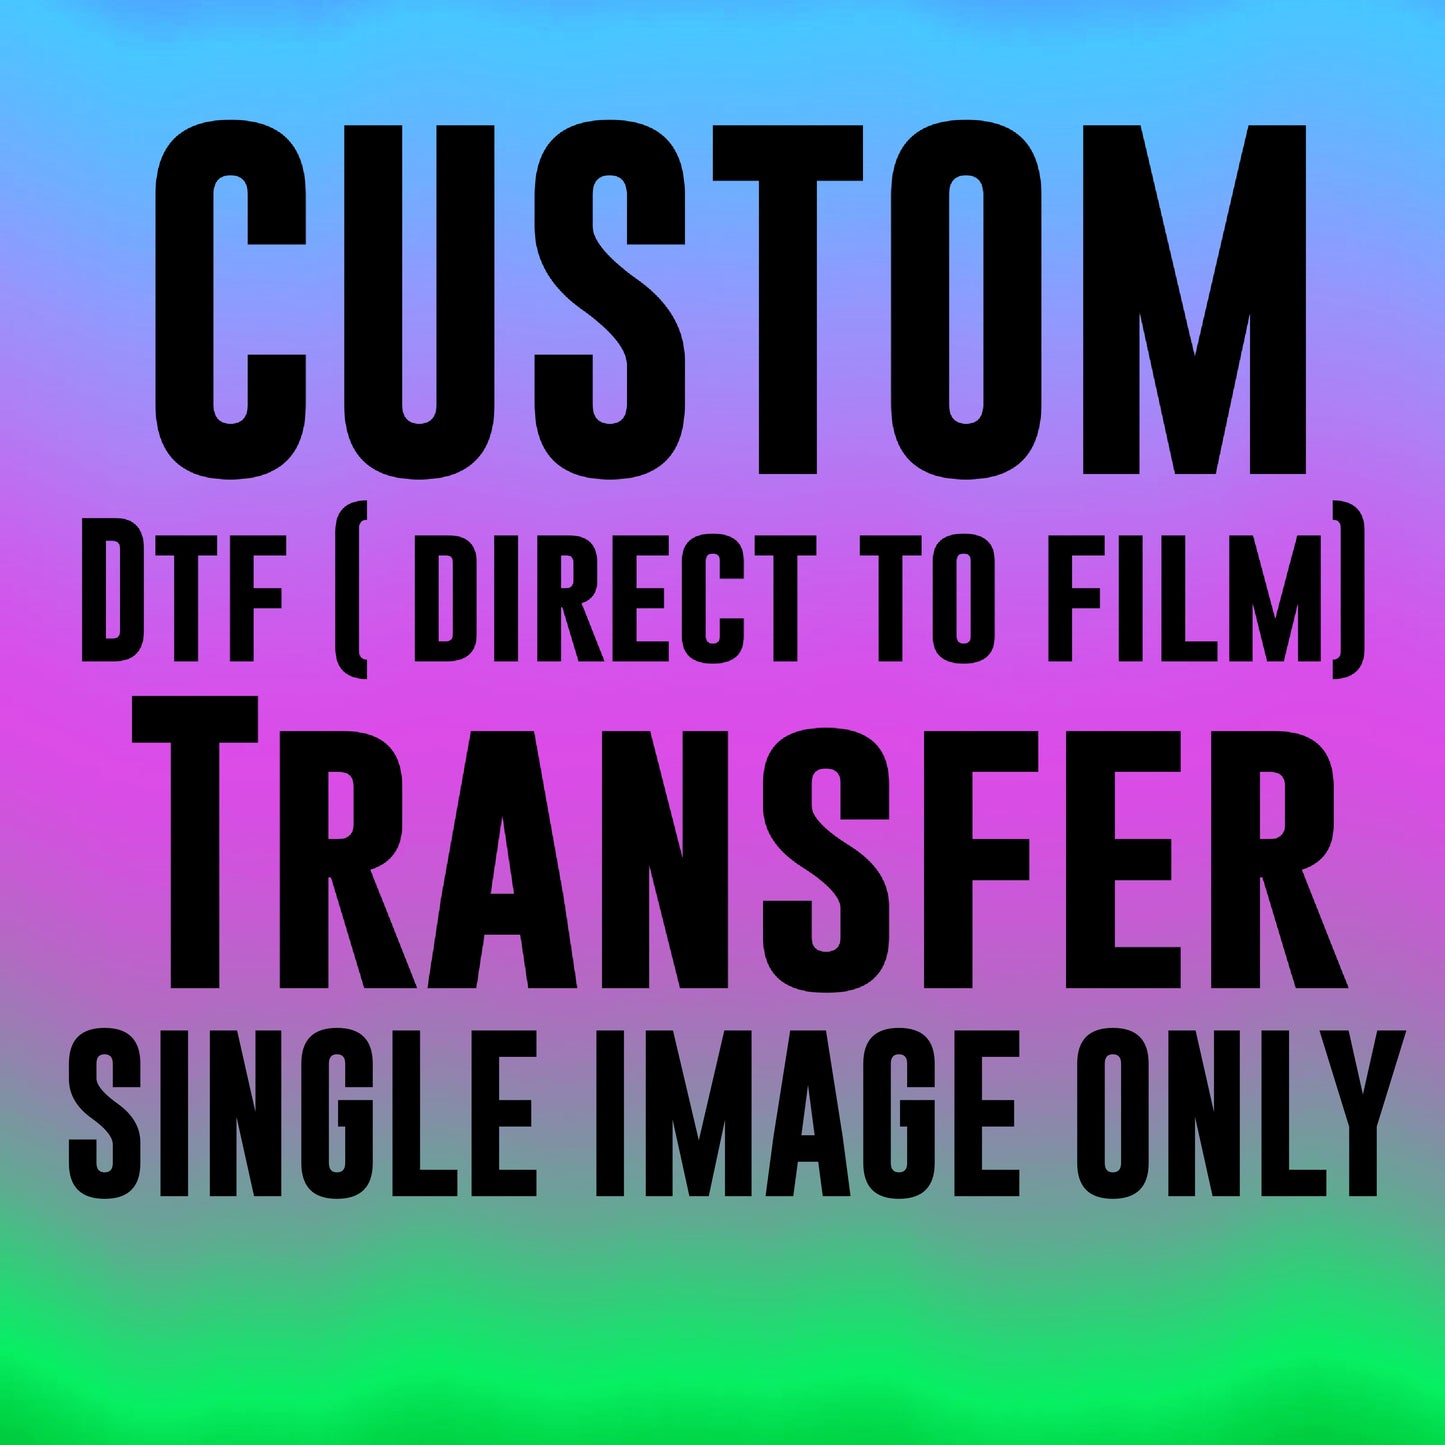 Custom Dtf (direct to film) transfer 12x12 (single image only)